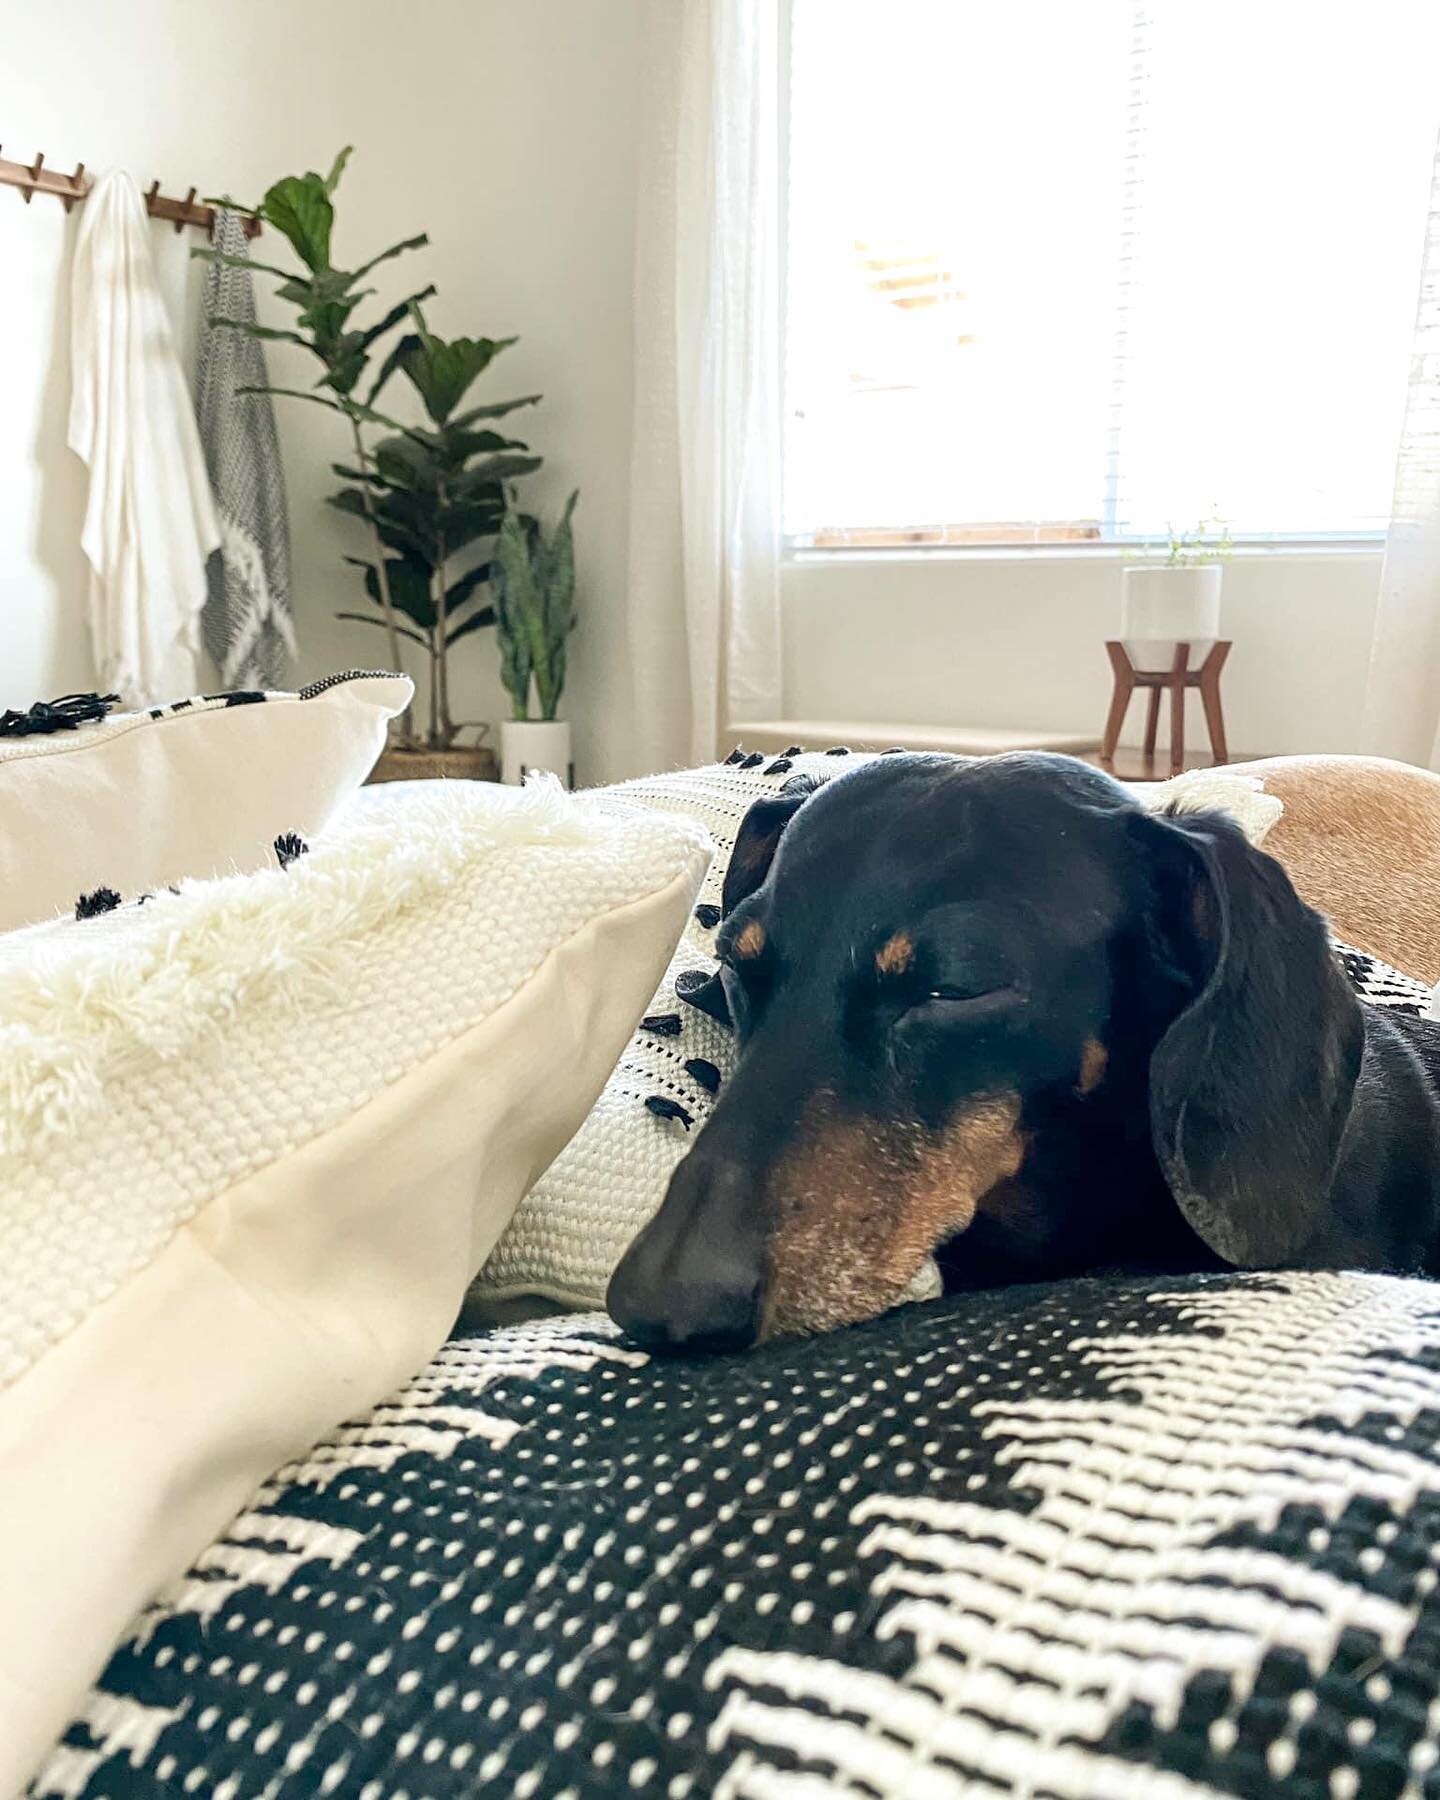 Daily dose of wiener dog. Did you know&hellip;

I donate 50 lbs of dog and cat food to a local animal rescue after every house I sell. 

Over the last several years, my husband, Matt @aspectsandanglesphotography, and I have rescued 2 cats and 6 dogs 